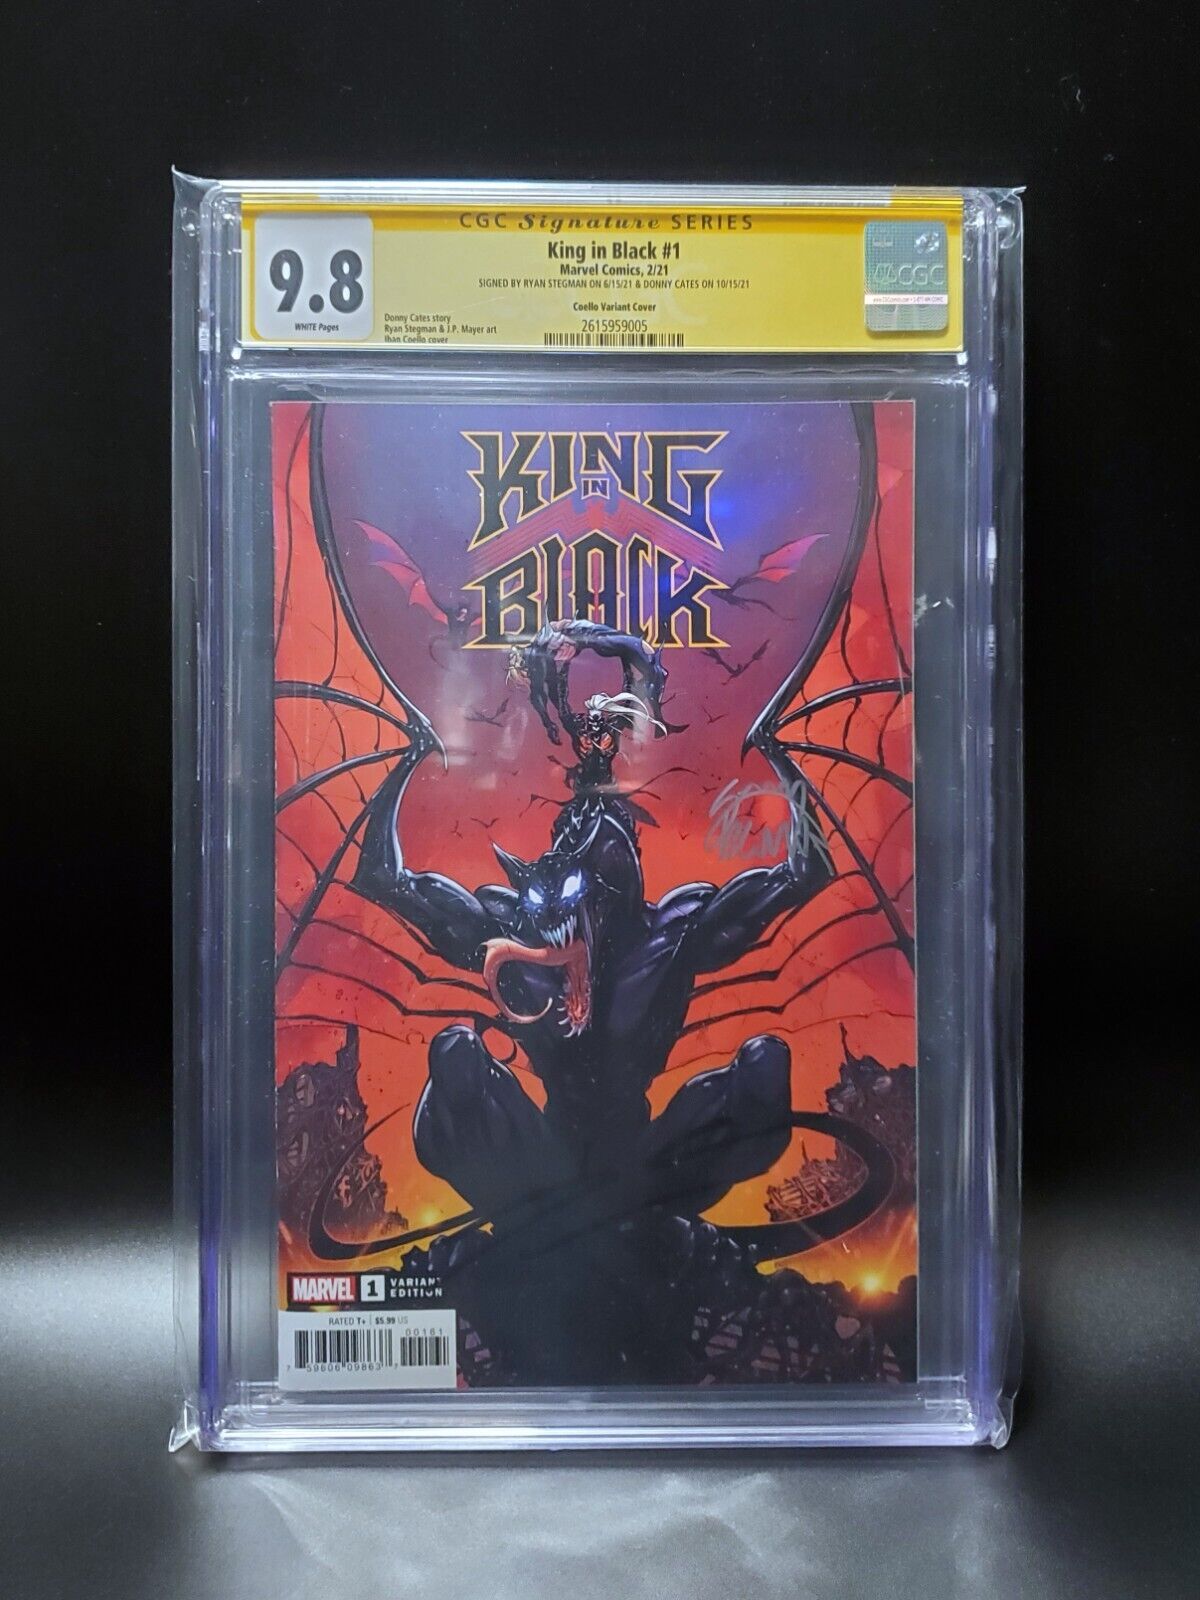 King in Black 1 CGC SS 9.8 Coello 1:50 2x Signed Cates and Stegman 